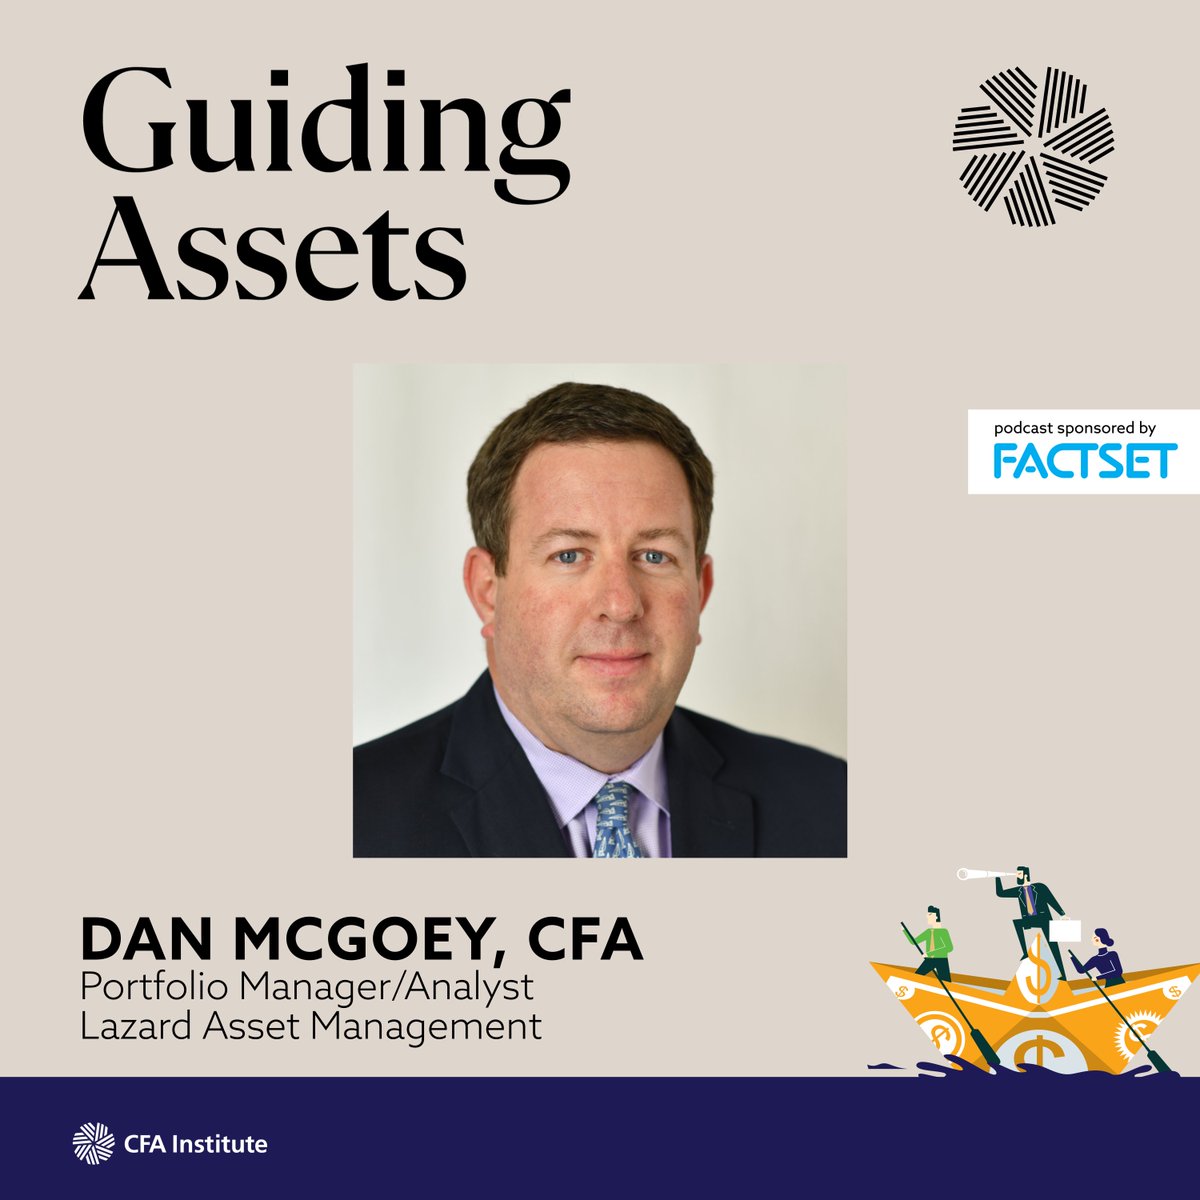 Tune in to the latest #GuidingAssets podcast with host Mike Wallberg, CFA, and Dan McGoey, CFA, as they discuss real assets.
 
Download ➡️ cfainst.is/3I0flx8 or where ever you get your podcasts.
 
#guidingassets #InvestmentIndustry #realassets